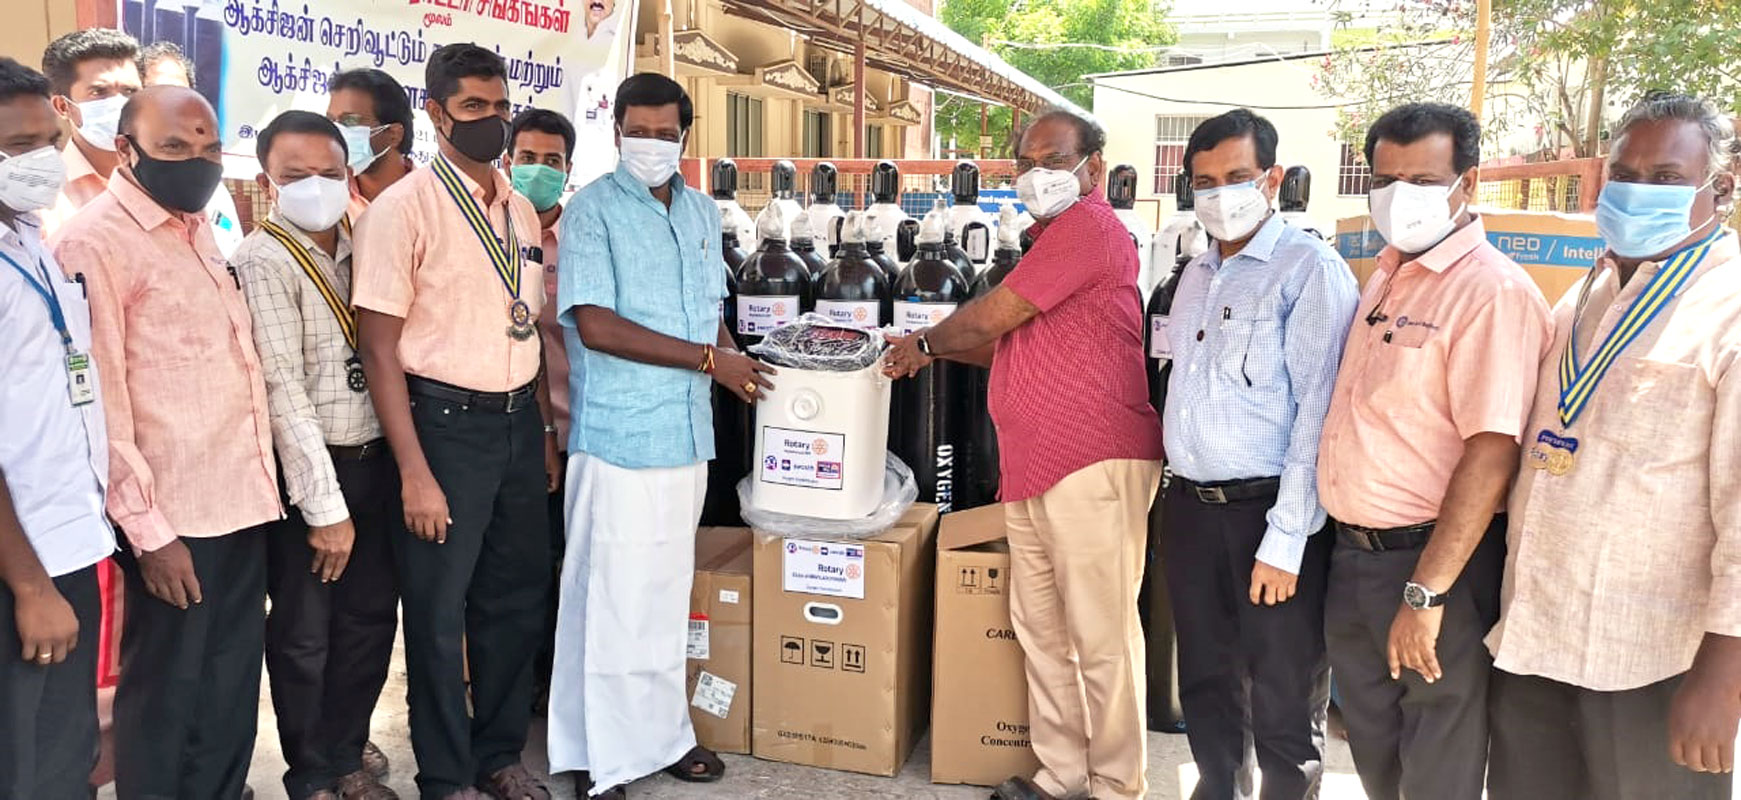 Mayiladuthurai MLA S Rajkumar (centre, left) hands over oxygen concentrators to Dr R Rajasekhar, CMO, government hospital in the presence of DG R Balaji Babu (third from R), RC Mayiladuthurai president K Durai (R) and project coordinator V Raman (fourth from L). 